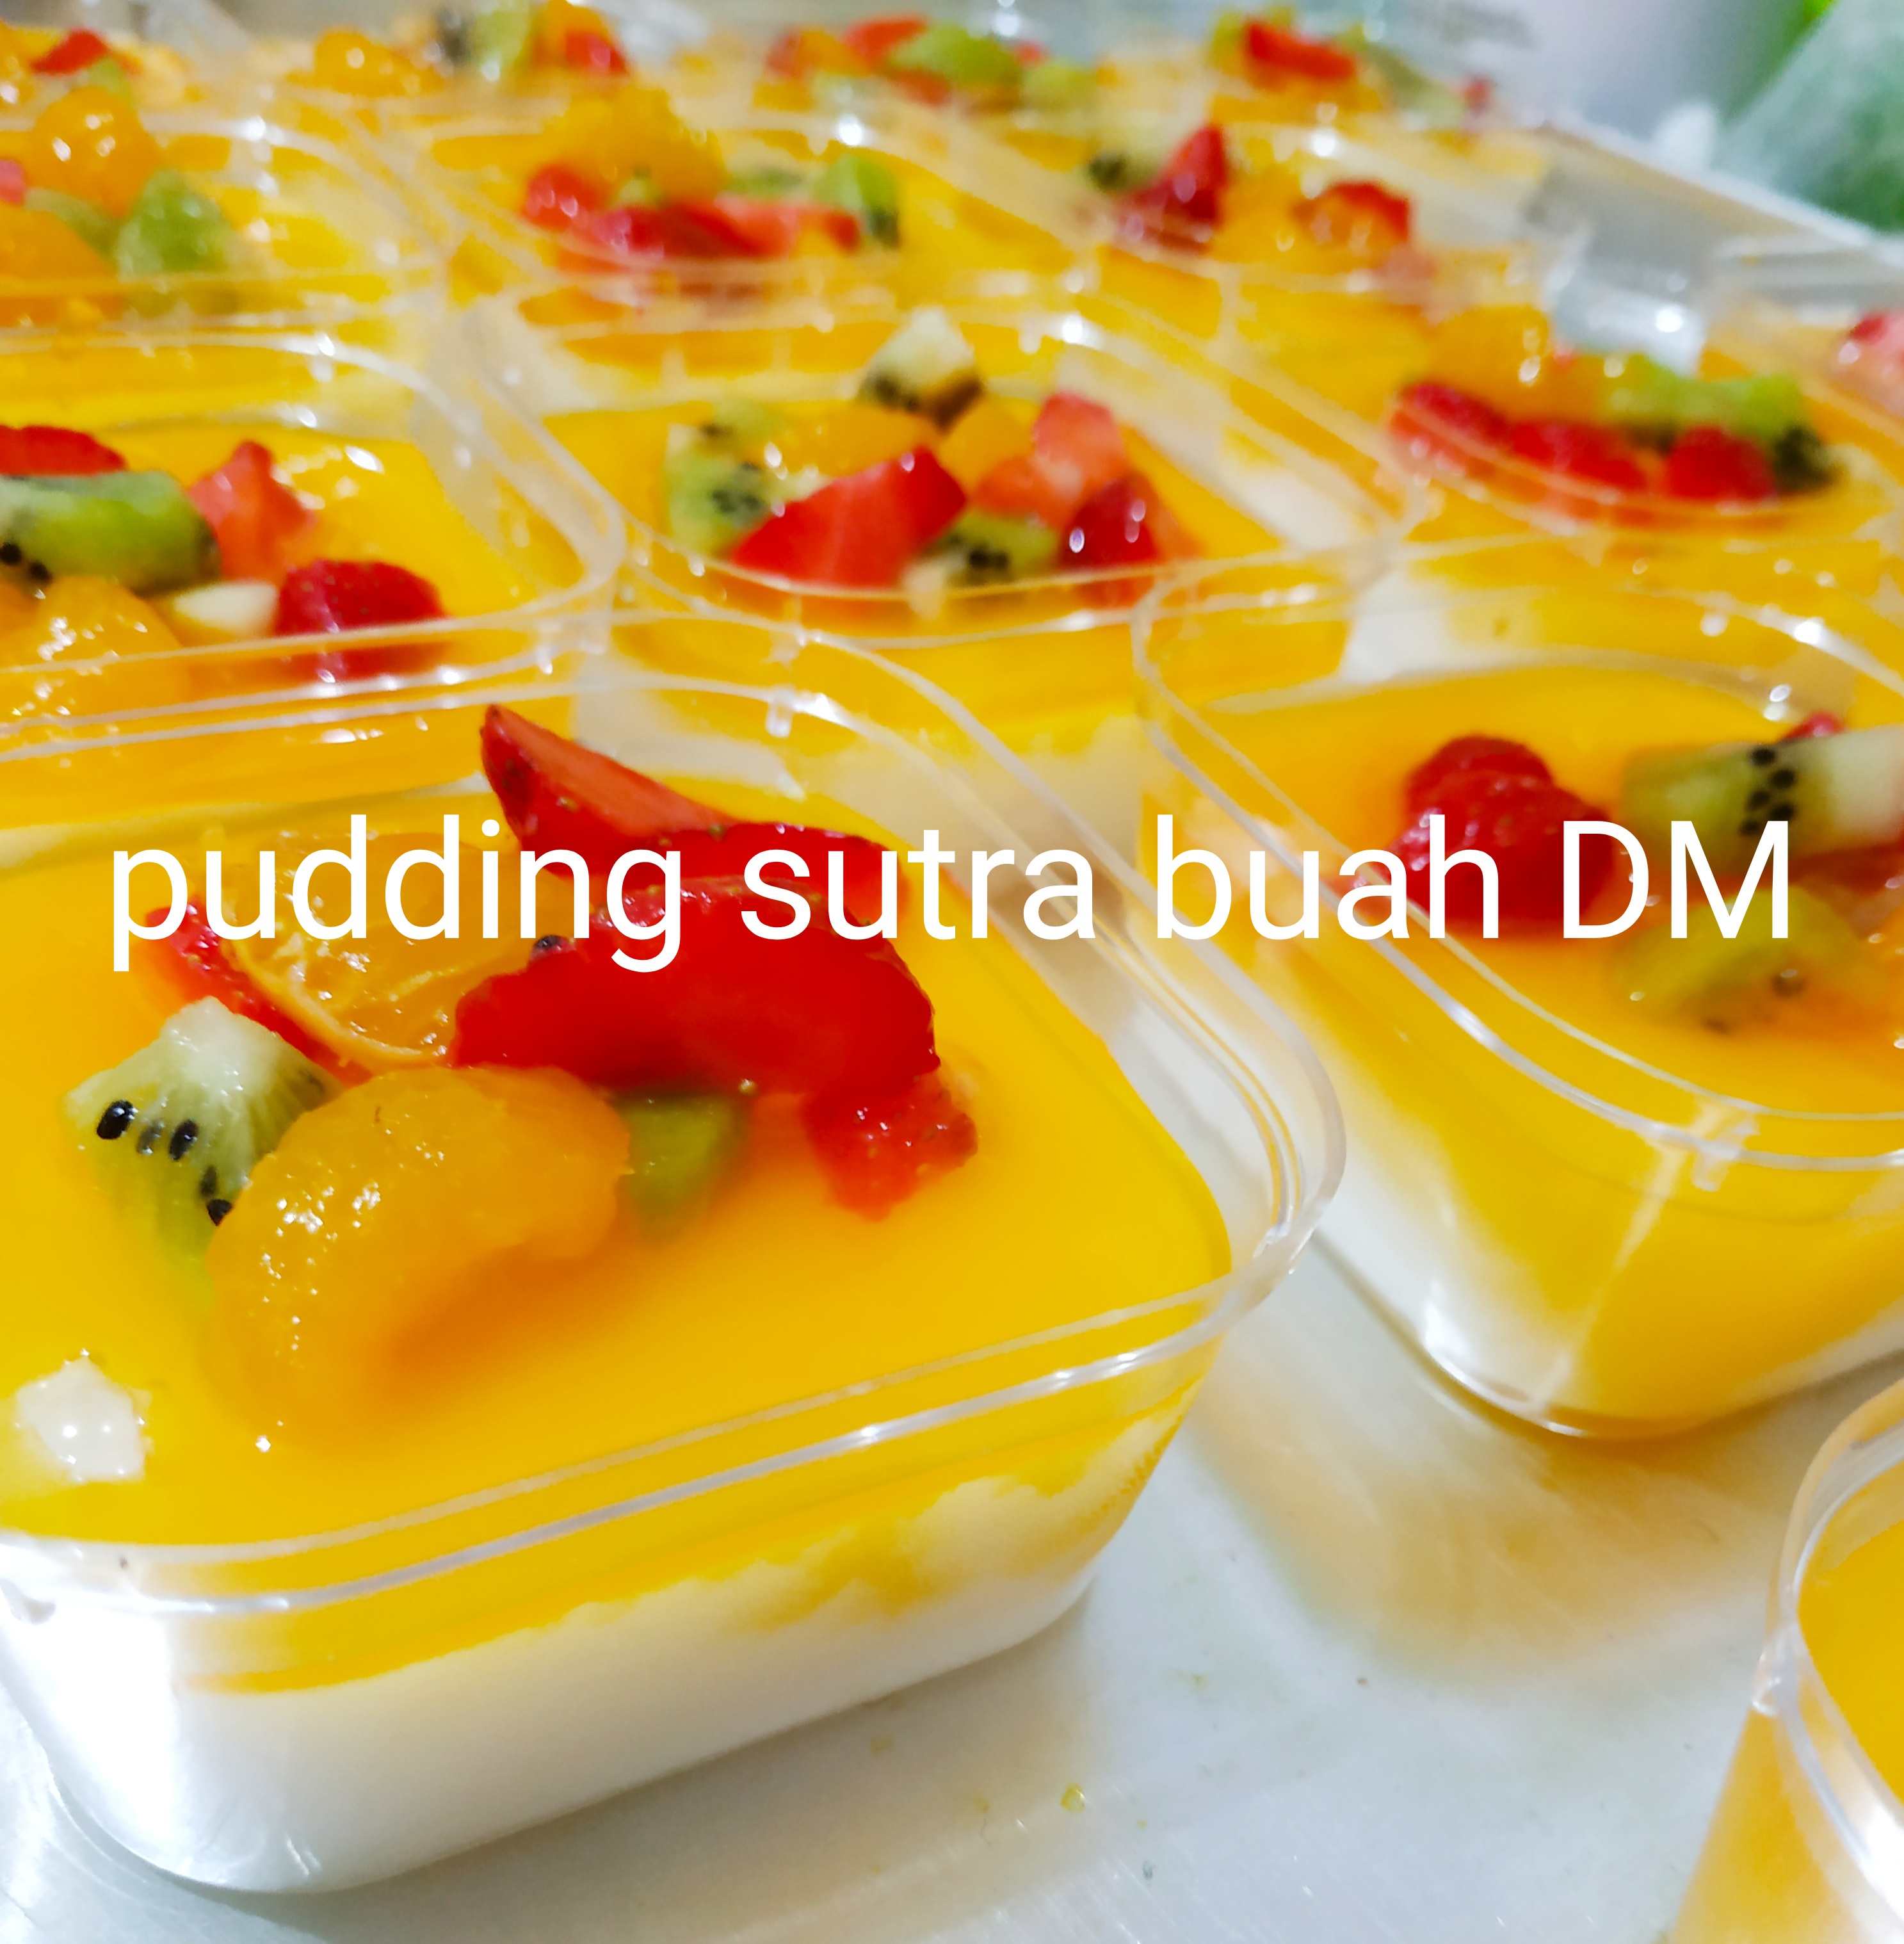 Pudding sutra buah